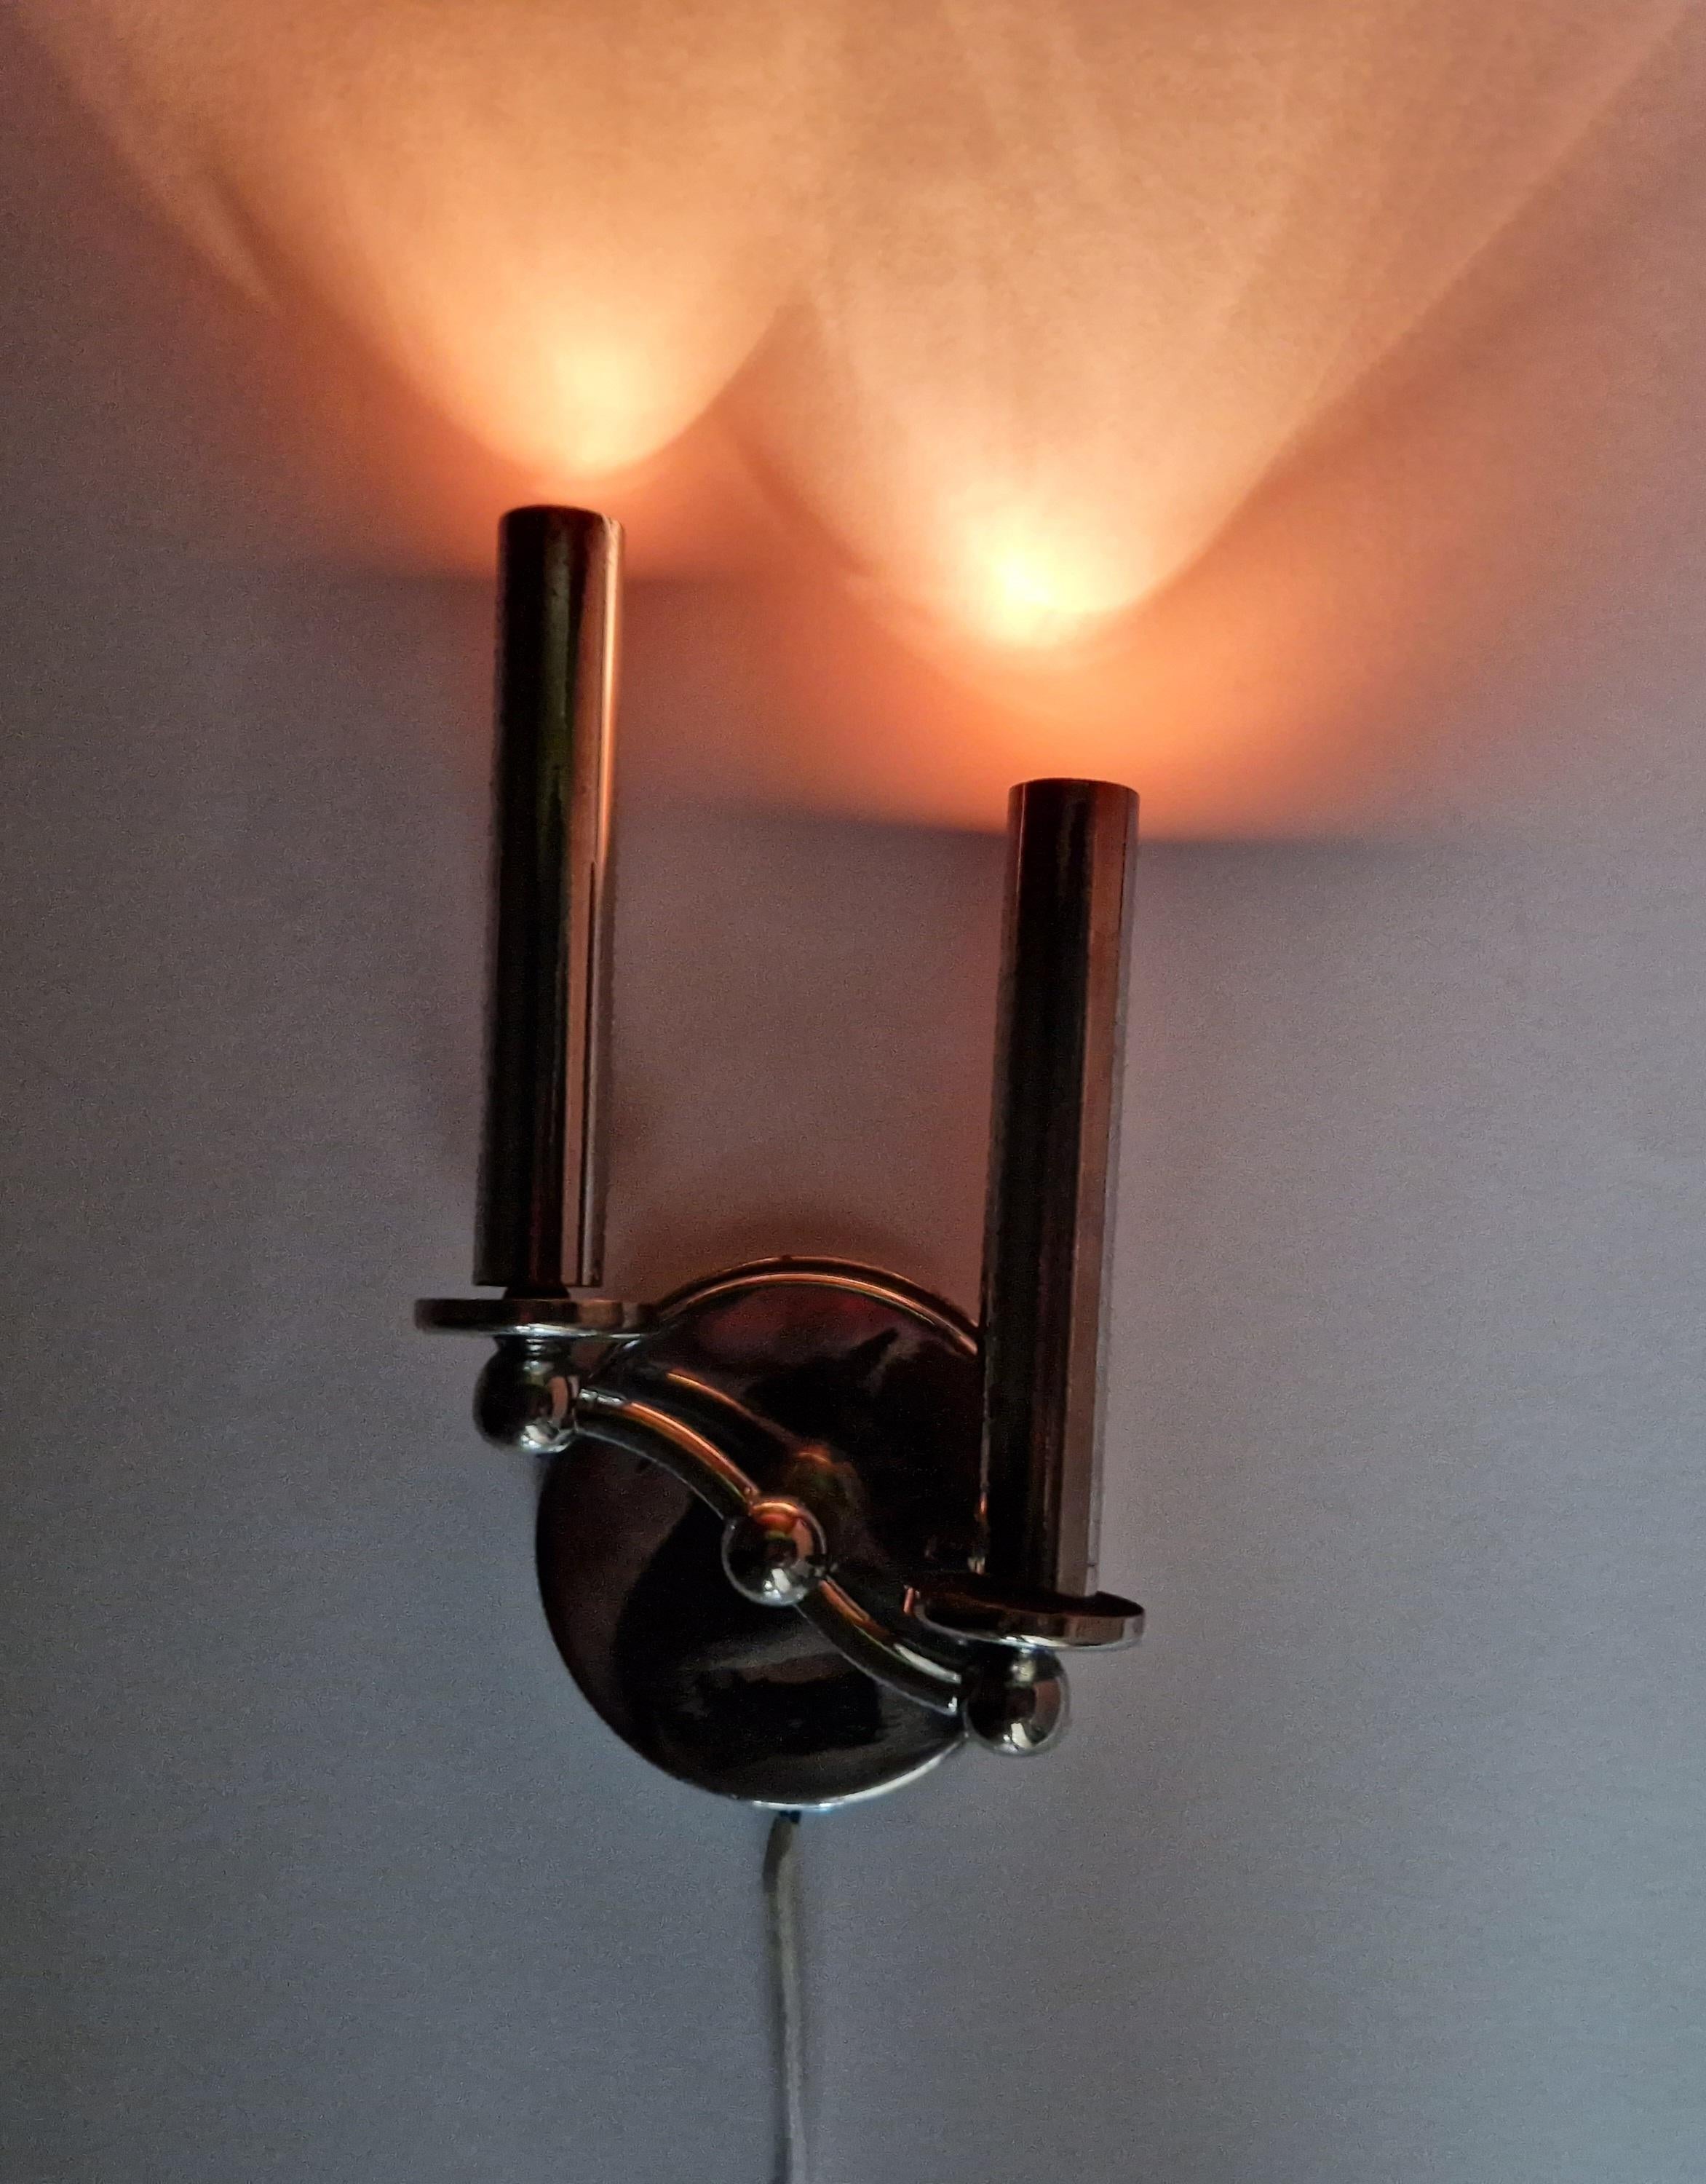 Pair of Rare Chrome Art Deco / Functionalism Wall Lamps, 1930s For Sale 8